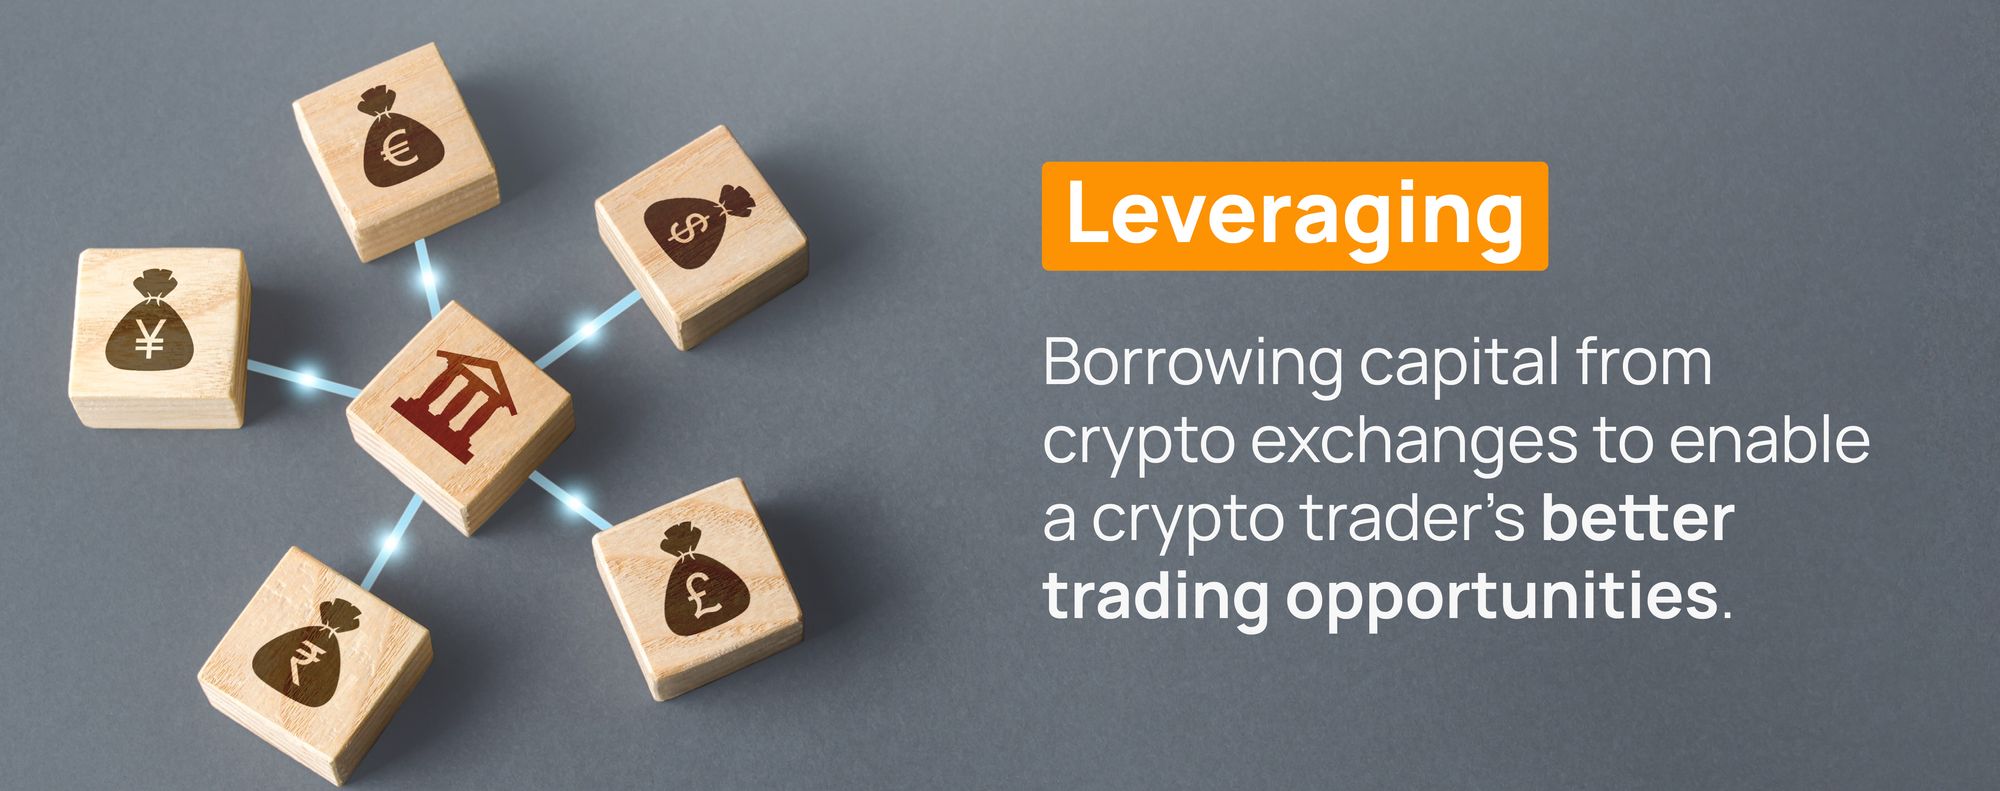 What is Leveraging?